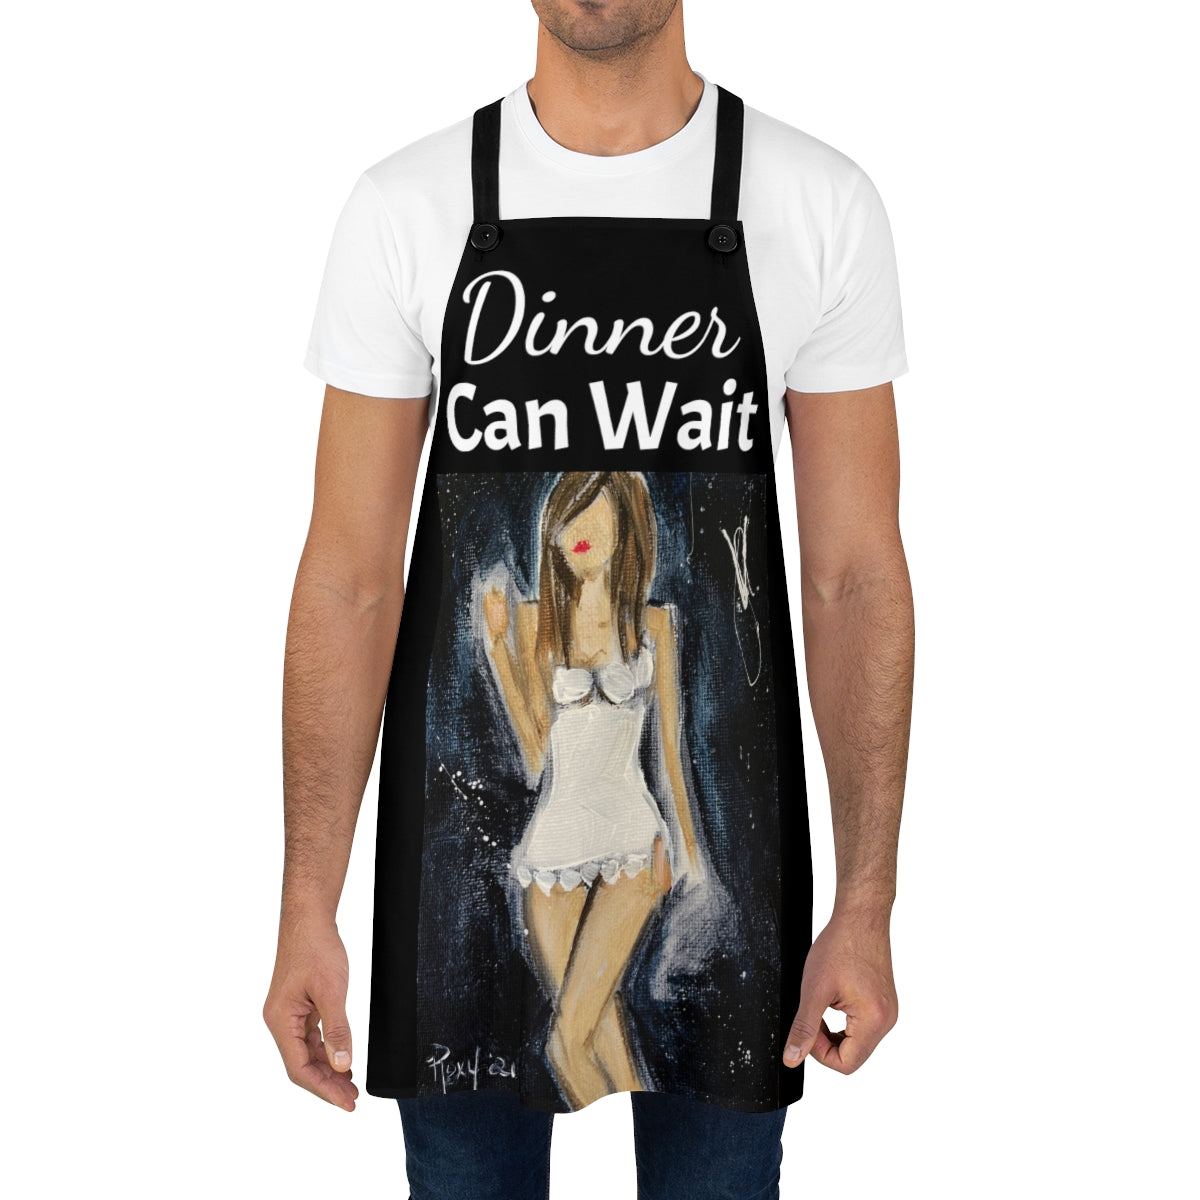 Dinner Can Wait on a Black Kitchen Apron    Sexy Lady in a Nighty